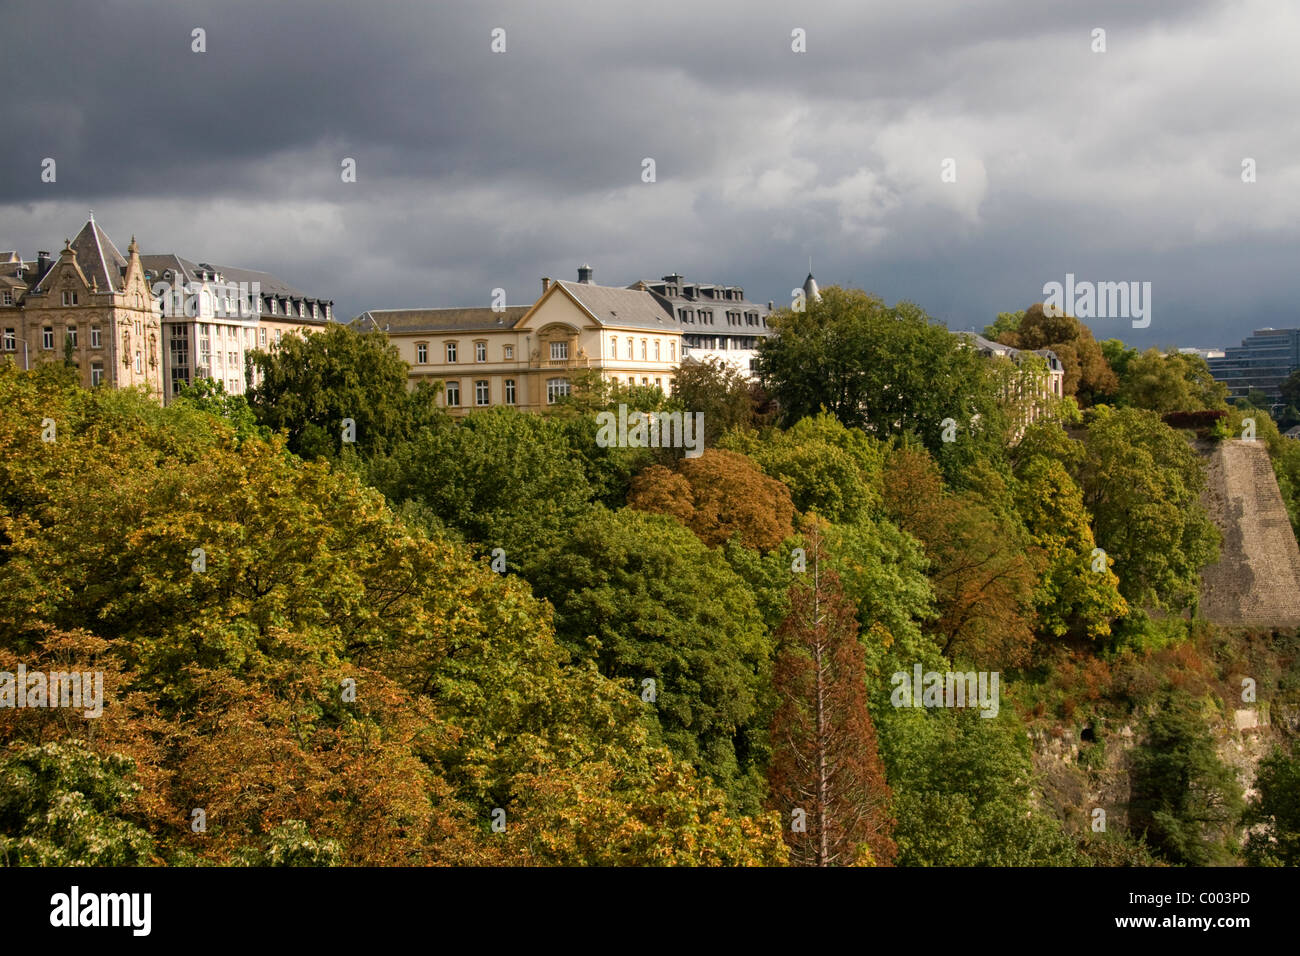 Vallee de la Petrusse in Luxembourg City, Luxembourg. Stock Photo